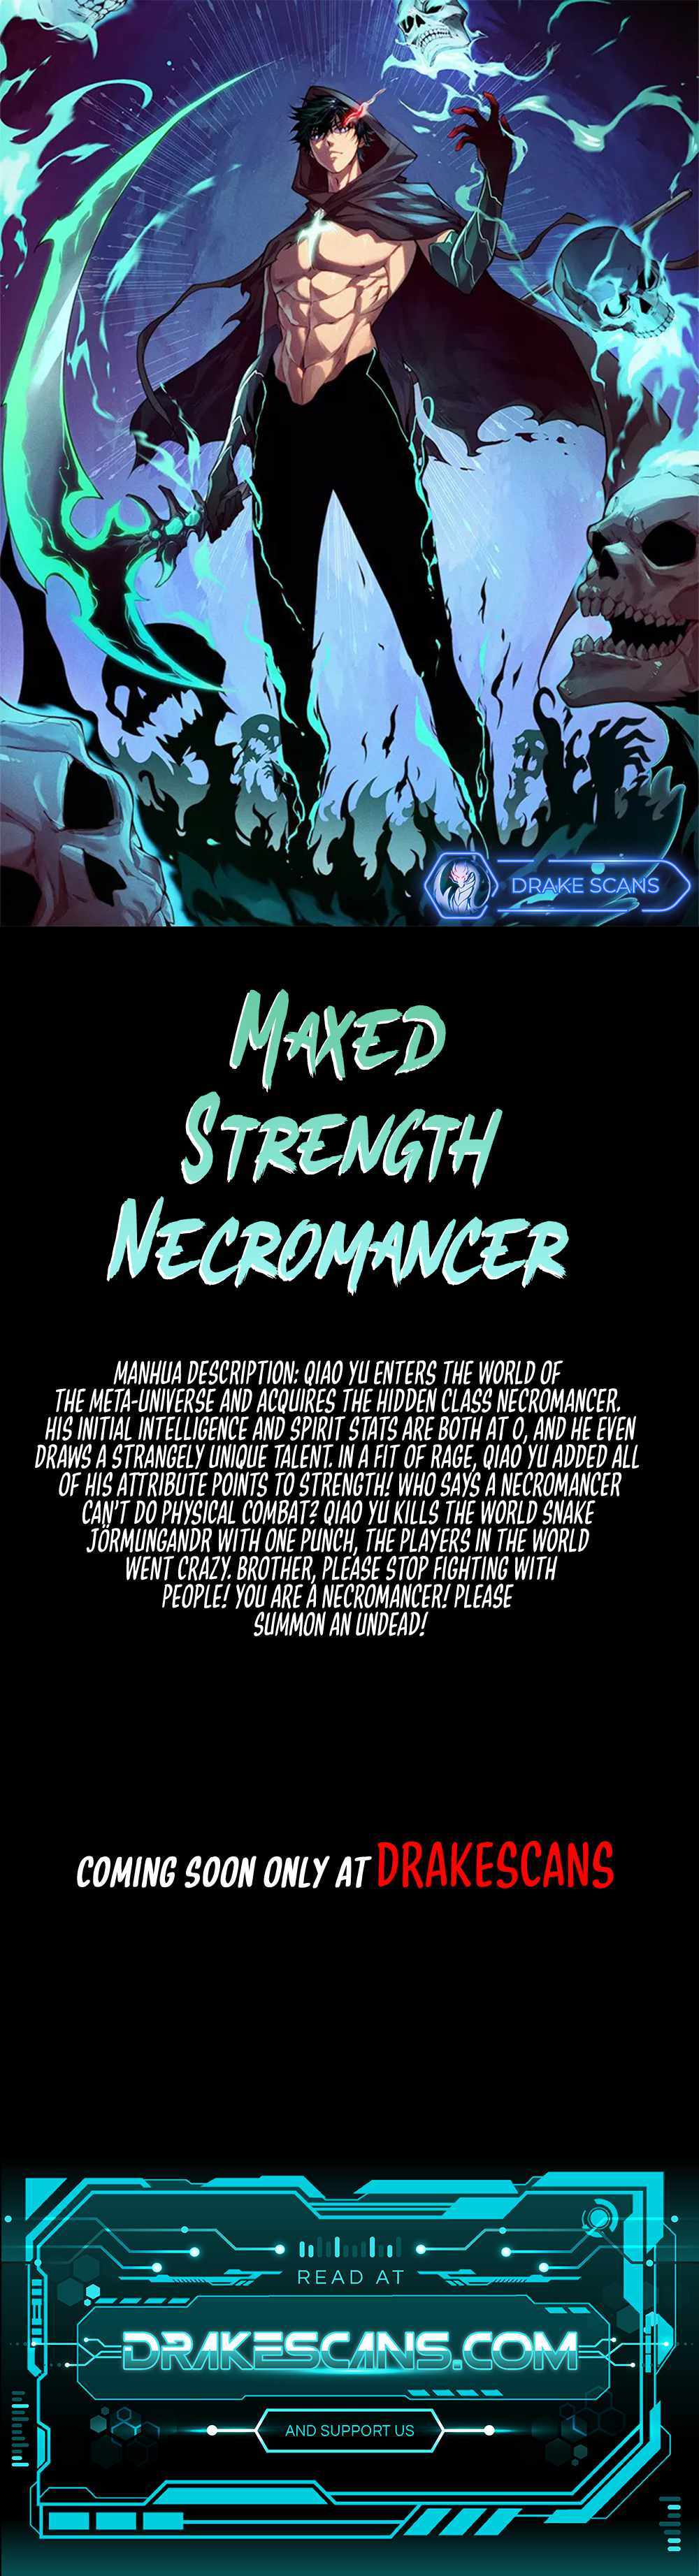 Maxed Strength Necromancer - Page 2